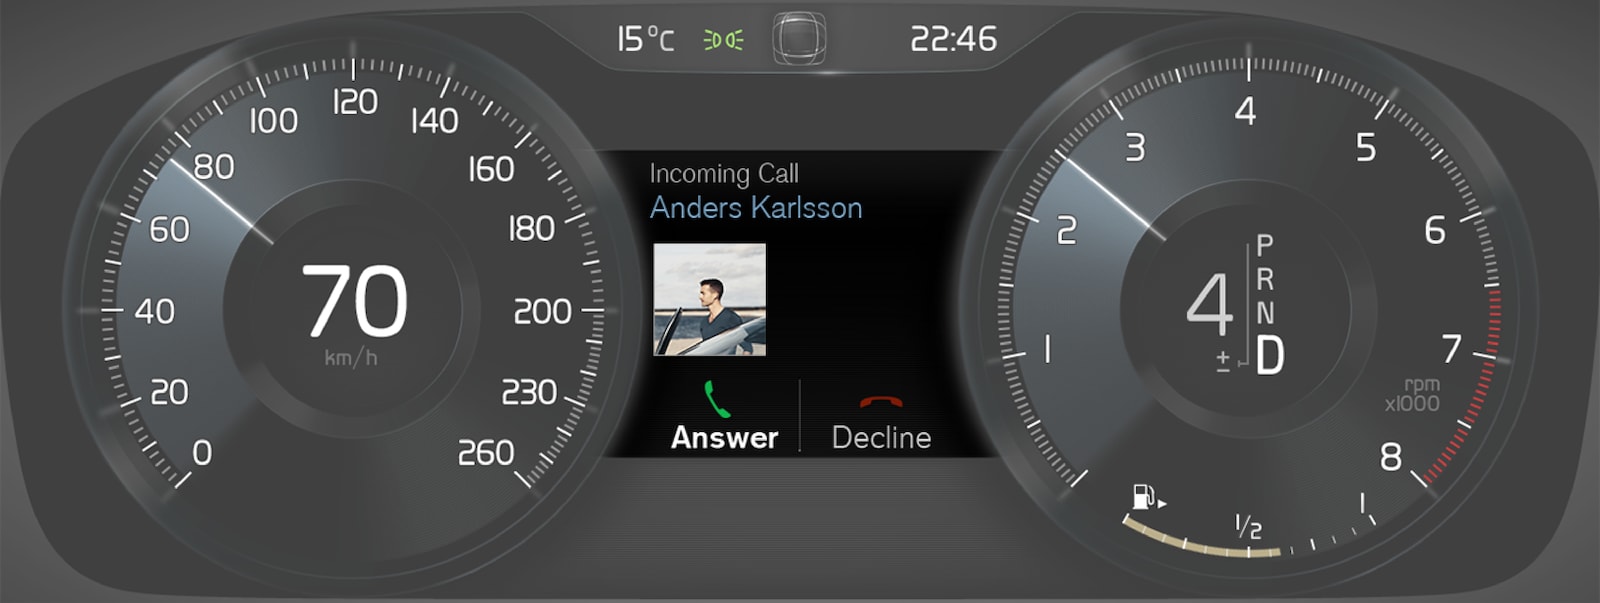 P5-1507-Incoming Call, message in driver display